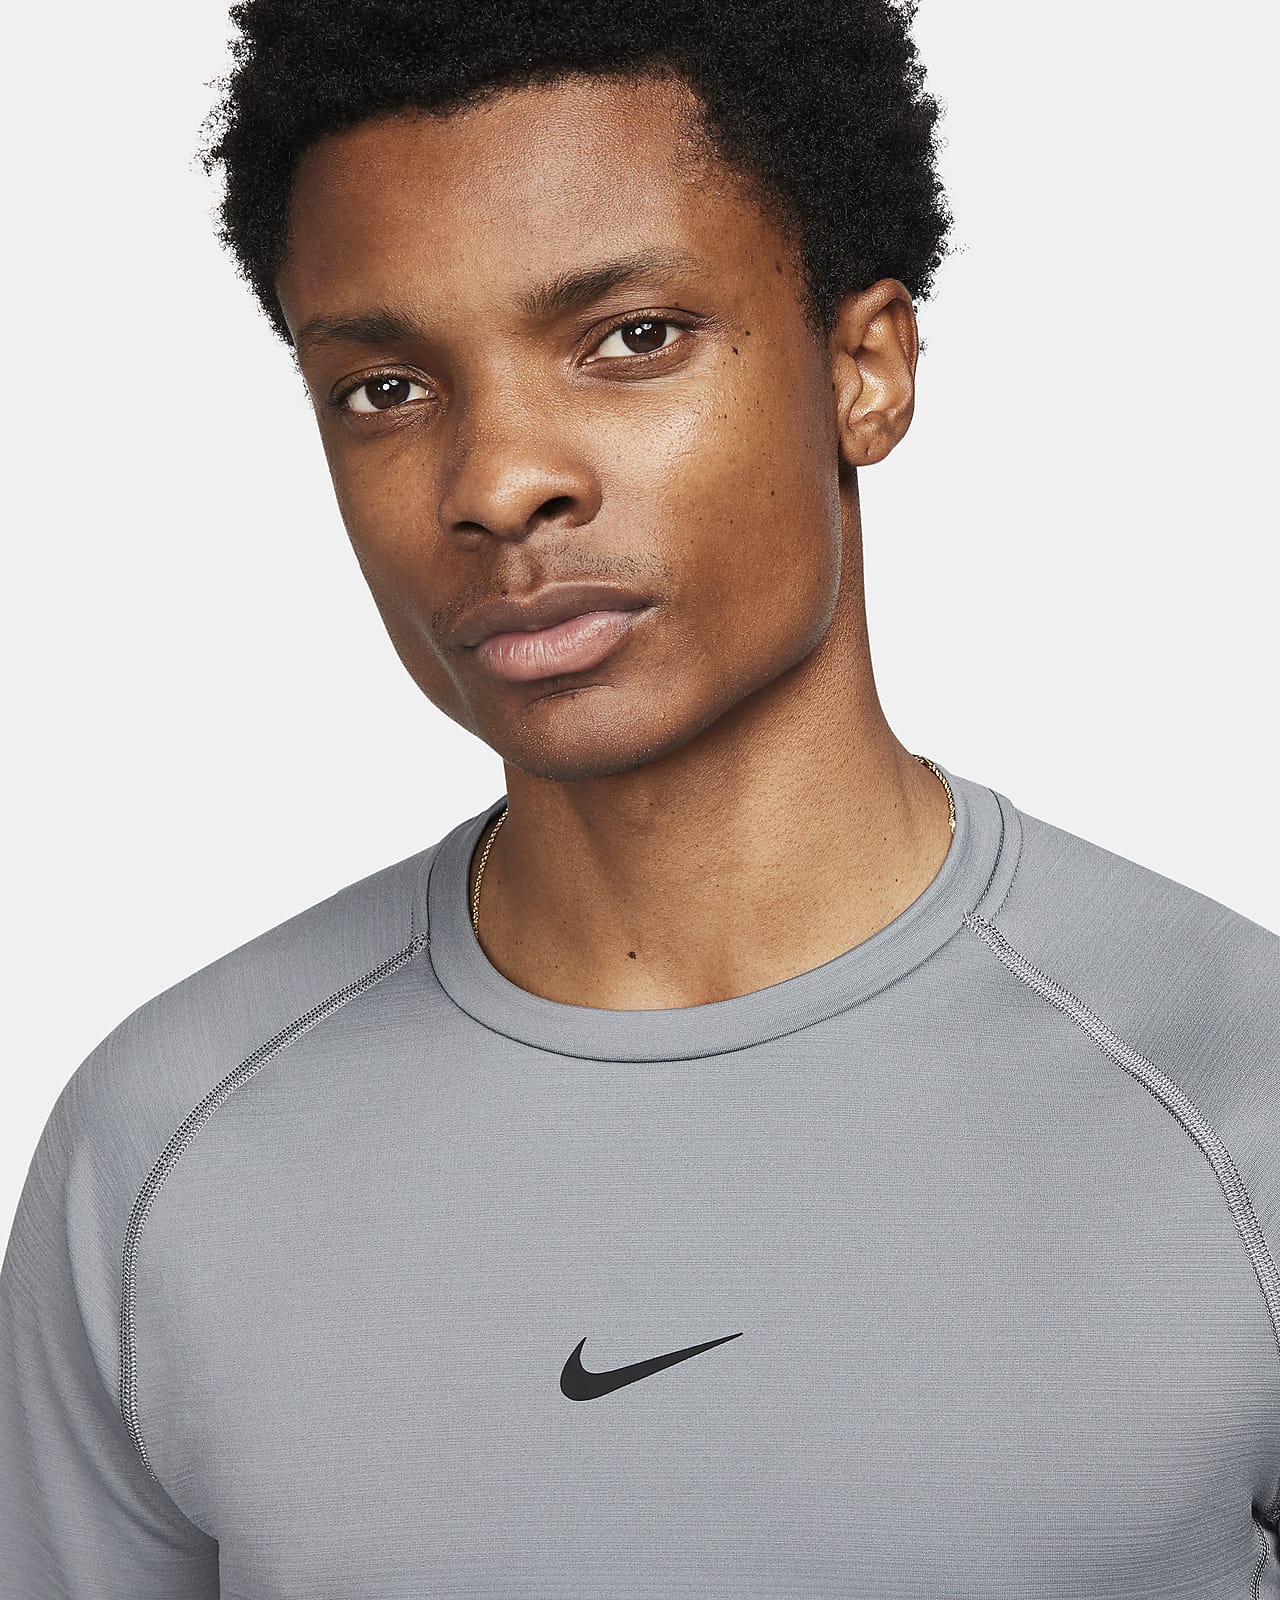 How to Buy the Right Yoga Clothes. Nike CA